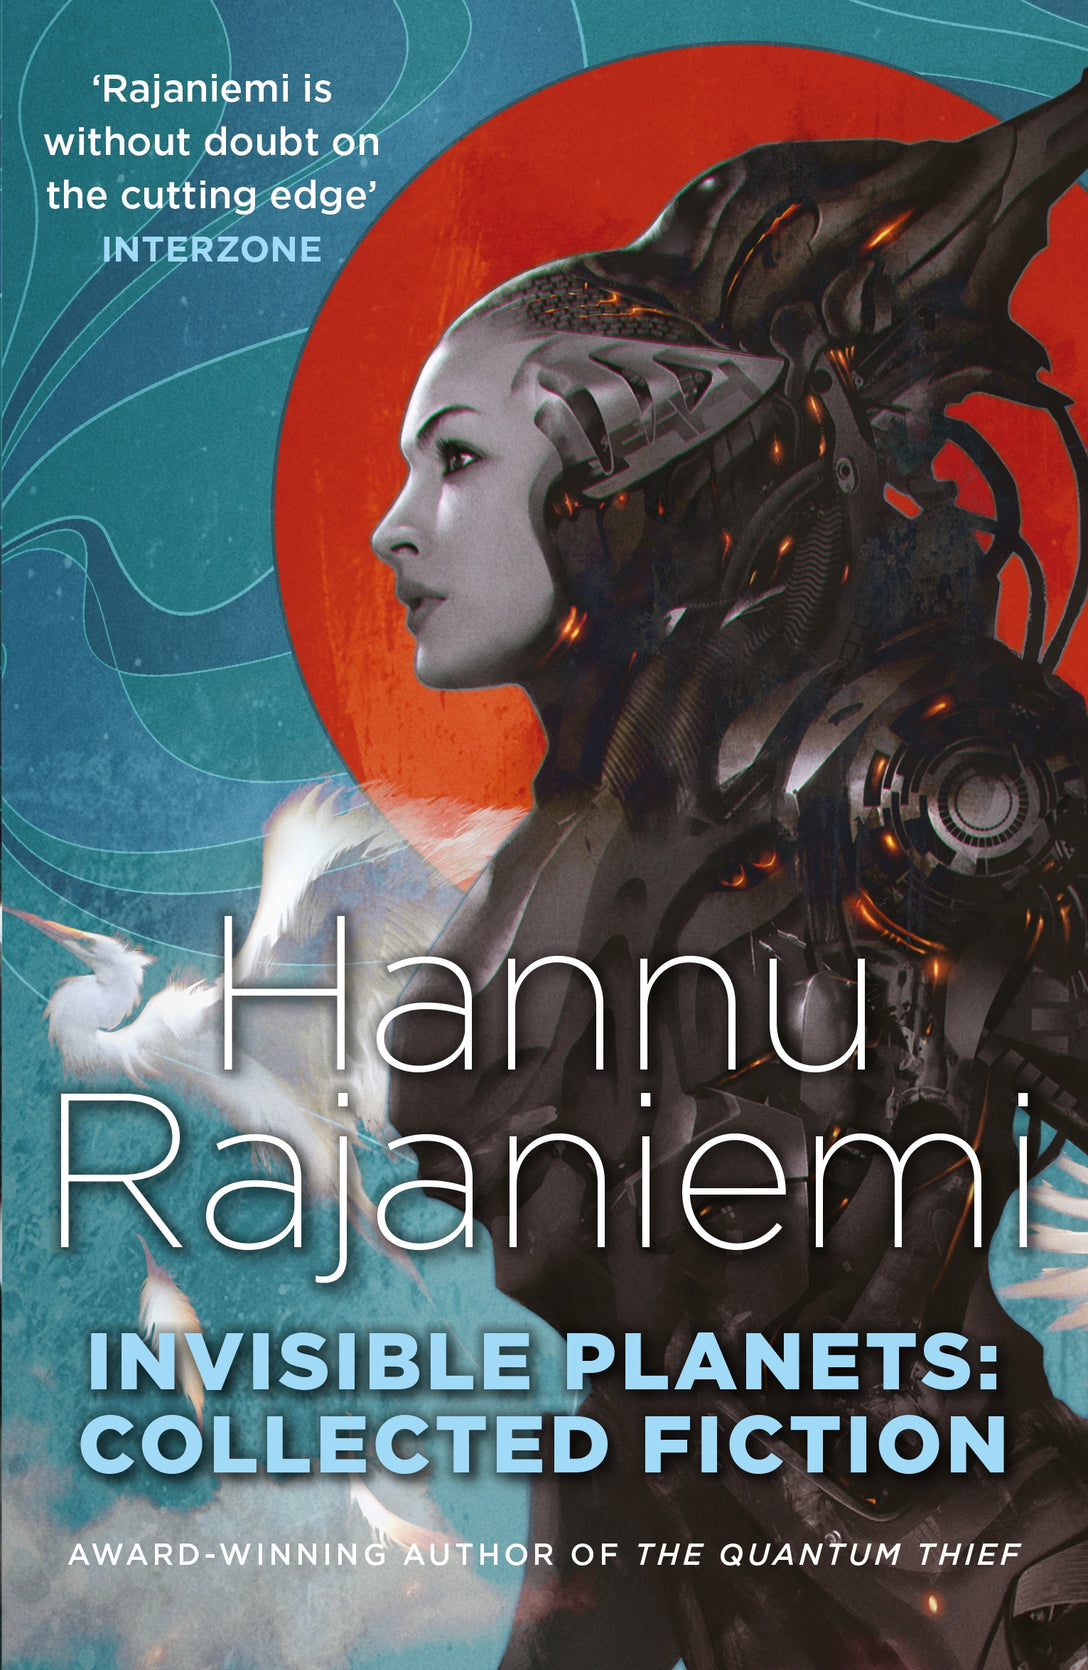 Invisible Planets by Hannu Rajaniemi